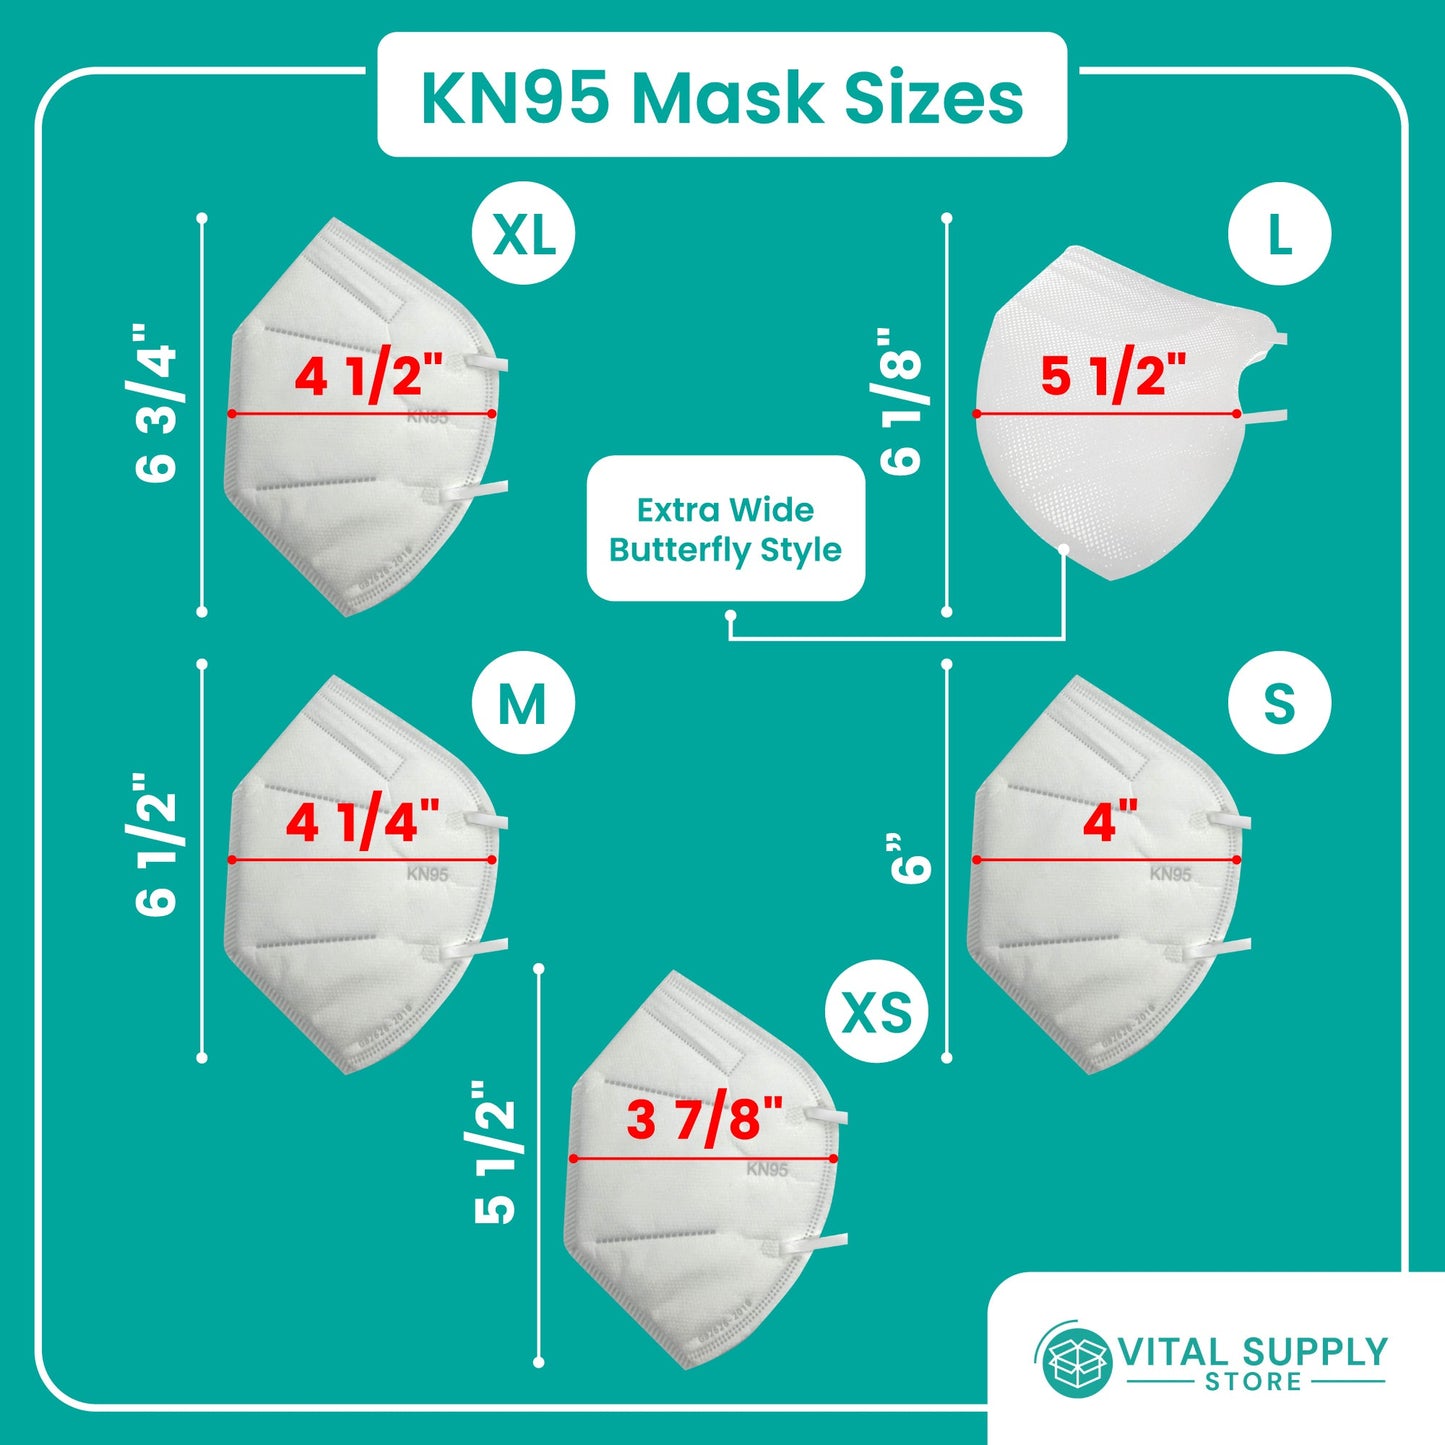 KN95 Masks with Adjustable Ear Loops - XL to Small Sizes - Vital Supply Store